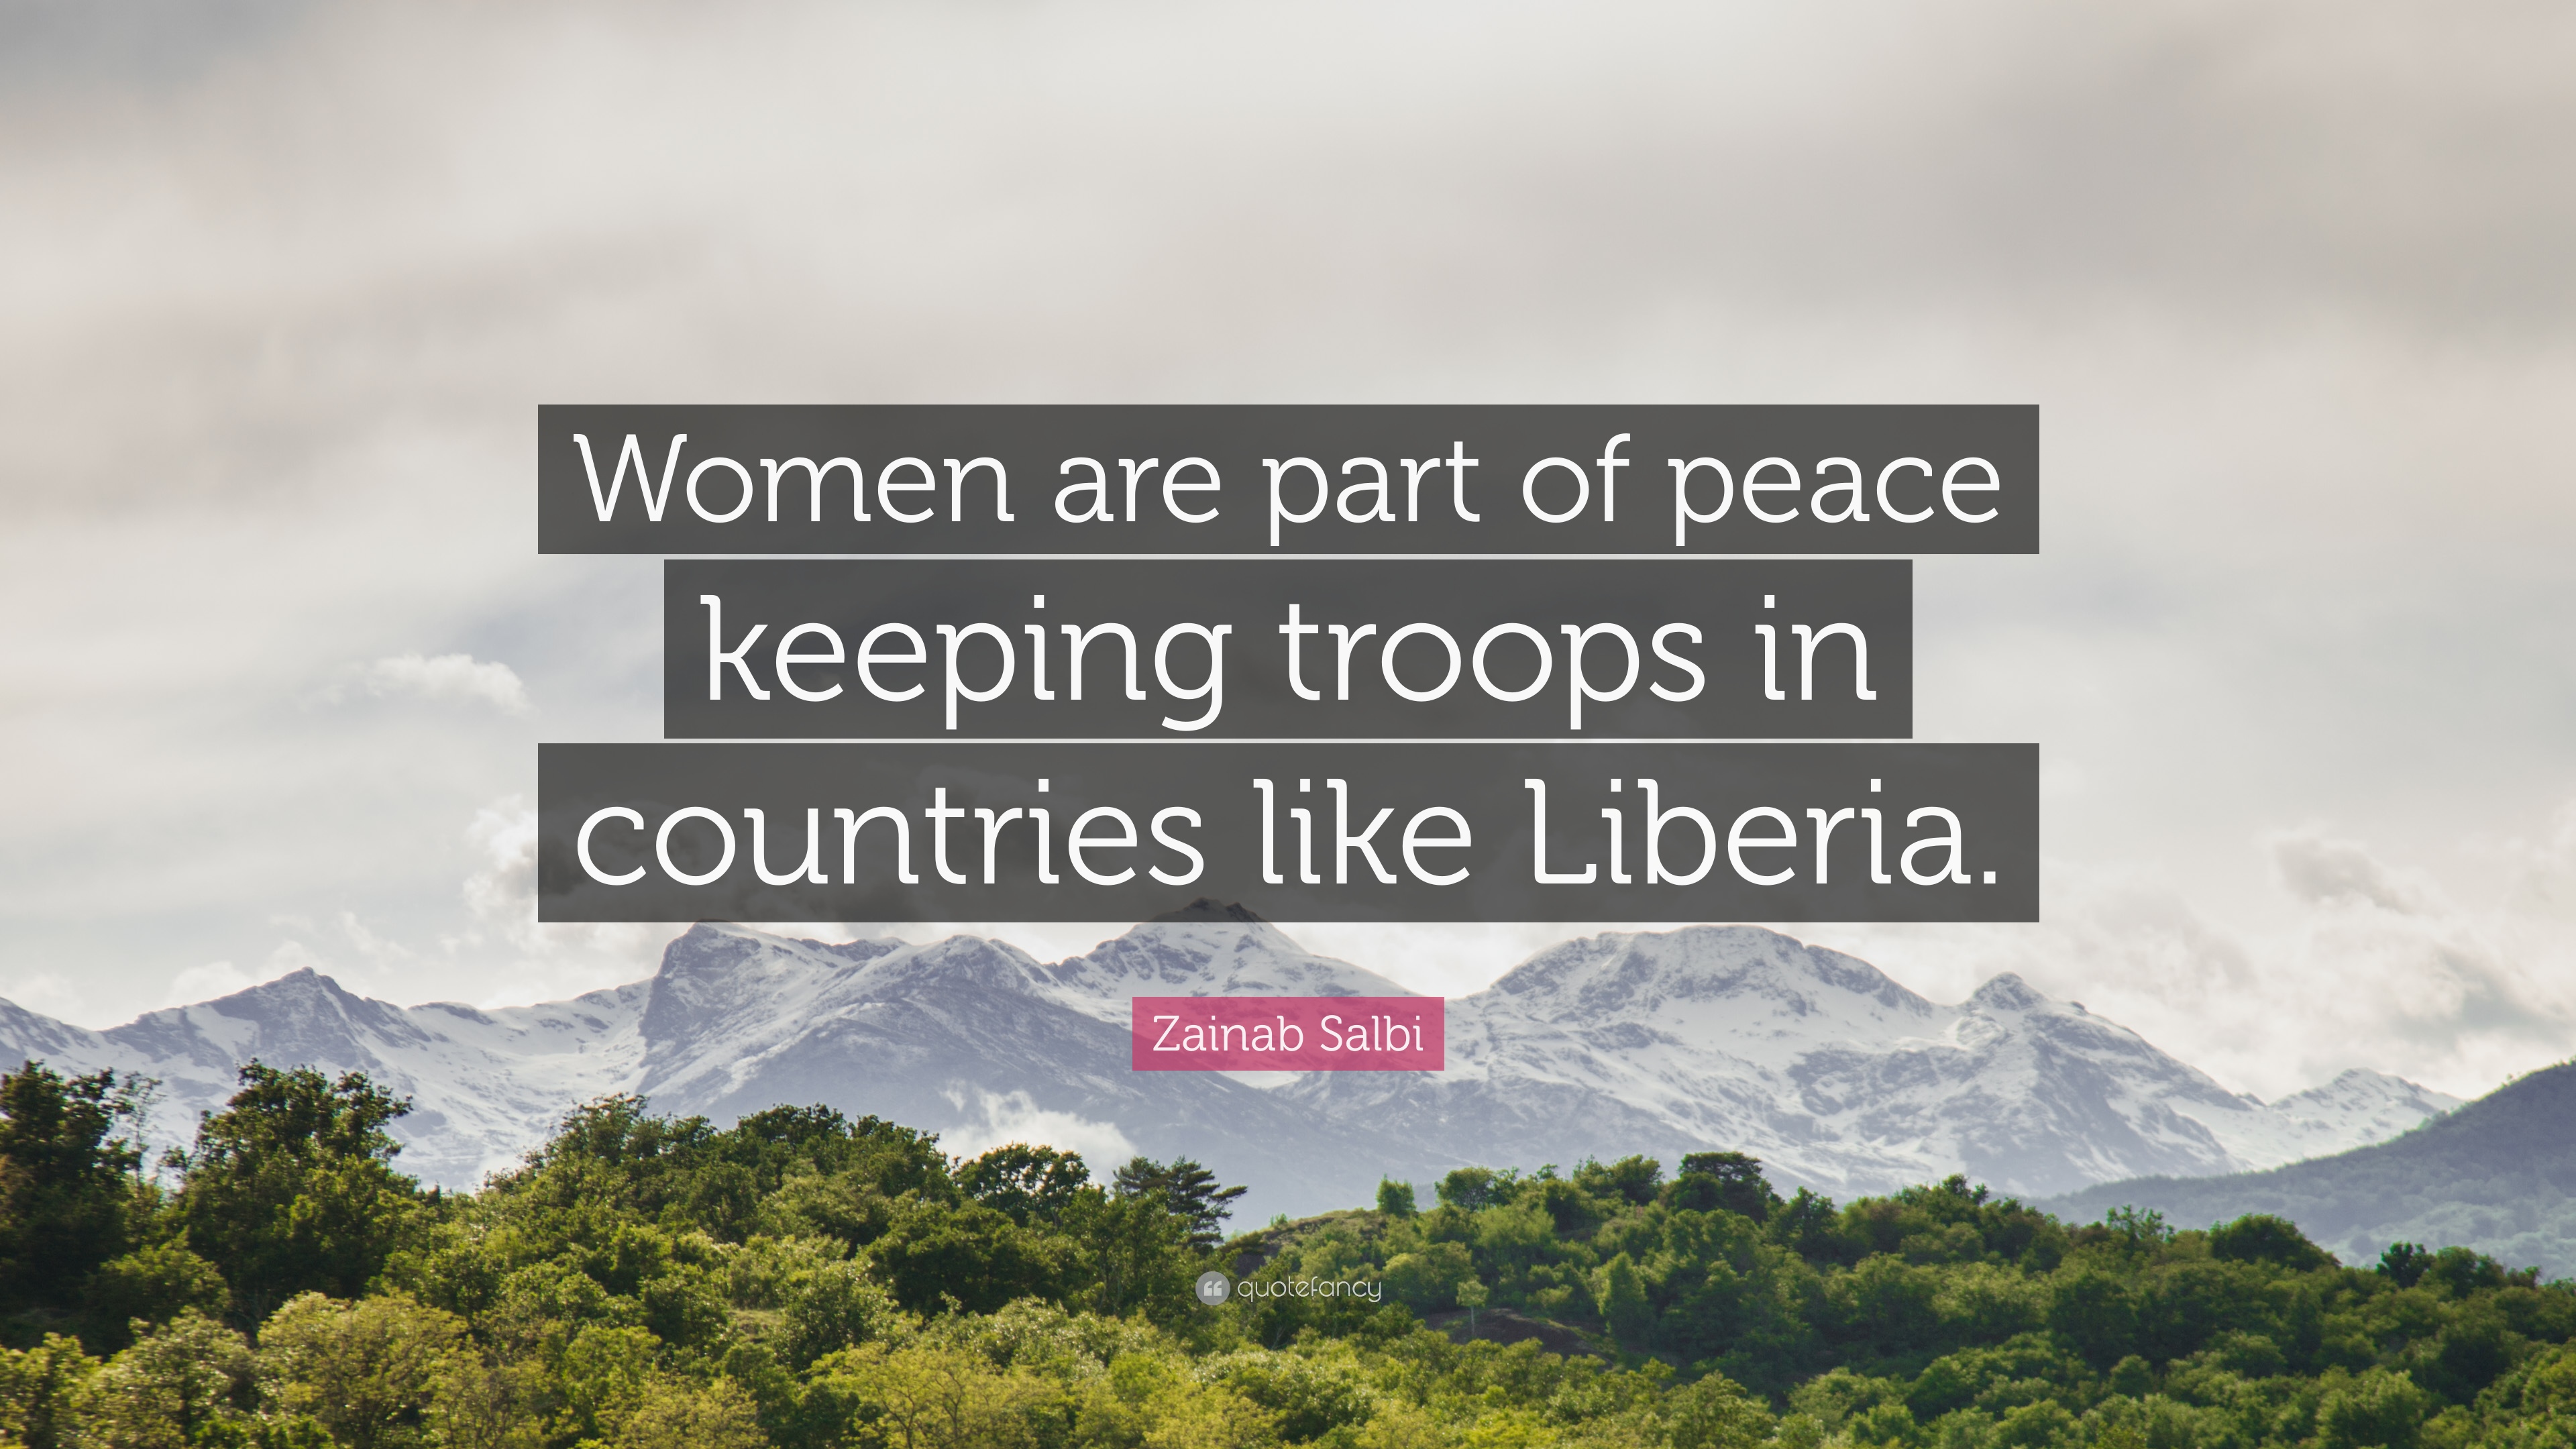 Zainab Salbi Quote: “Women are part of peace keeping troops